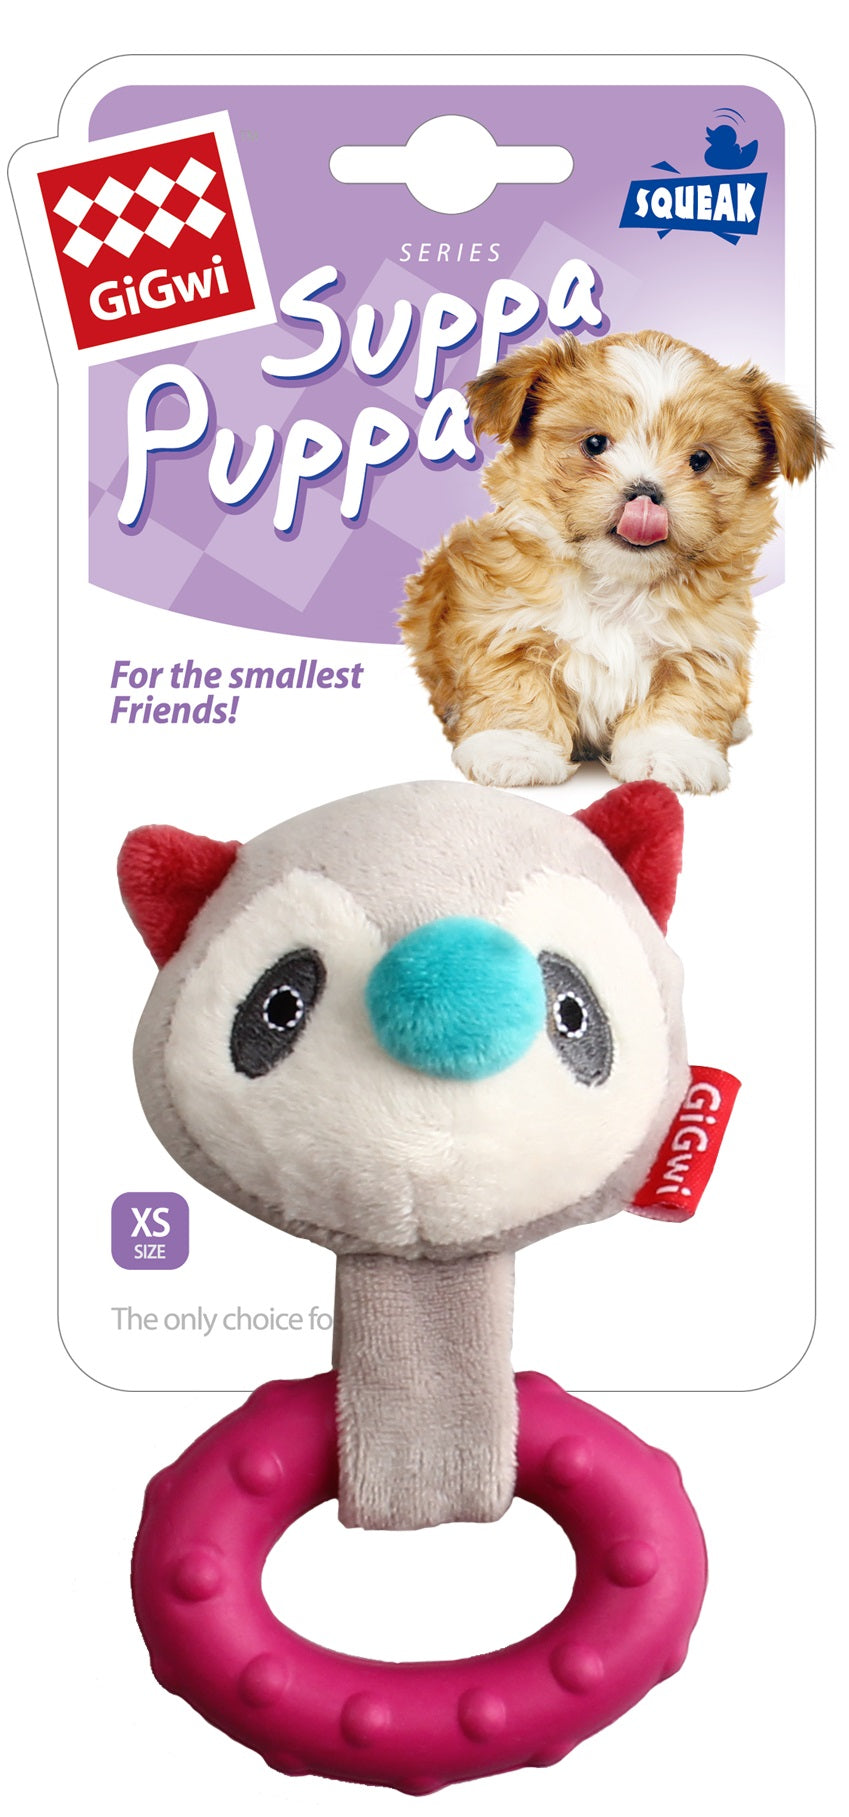 Gigwi Suppa Puppa Coon Squeaker inside Plush Toy